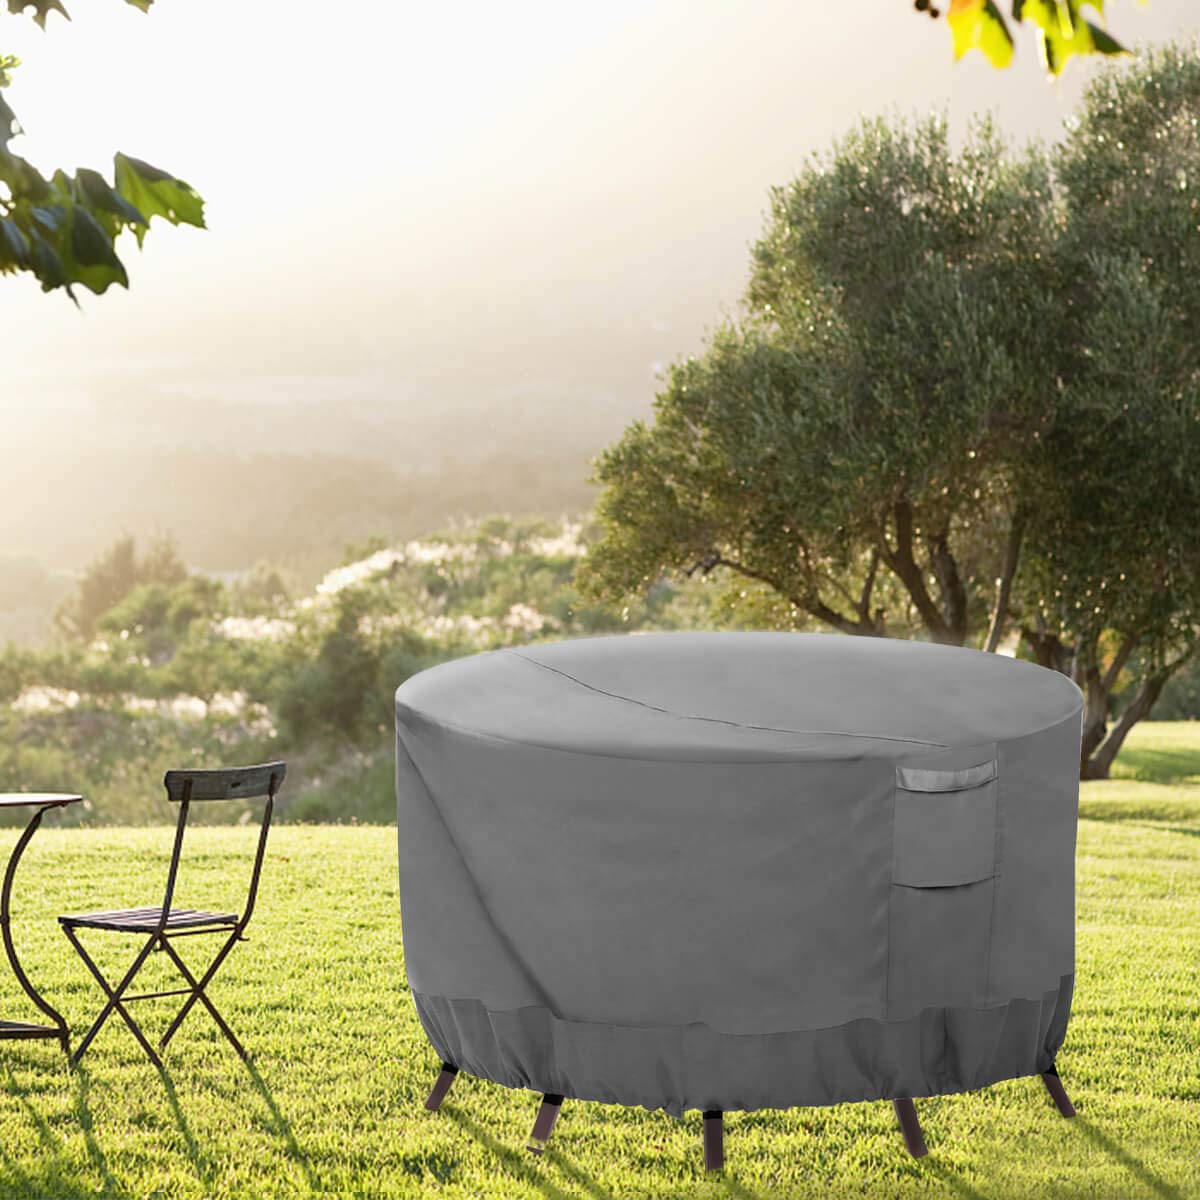 Vailge Round Patio Furniture Covers, 100% Waterproof Outdoor Table Chair Set Covers, Anti-Fading Cover for Outdoor Furniture Set, UV Resistant, 72"DIAx28"H, Grey